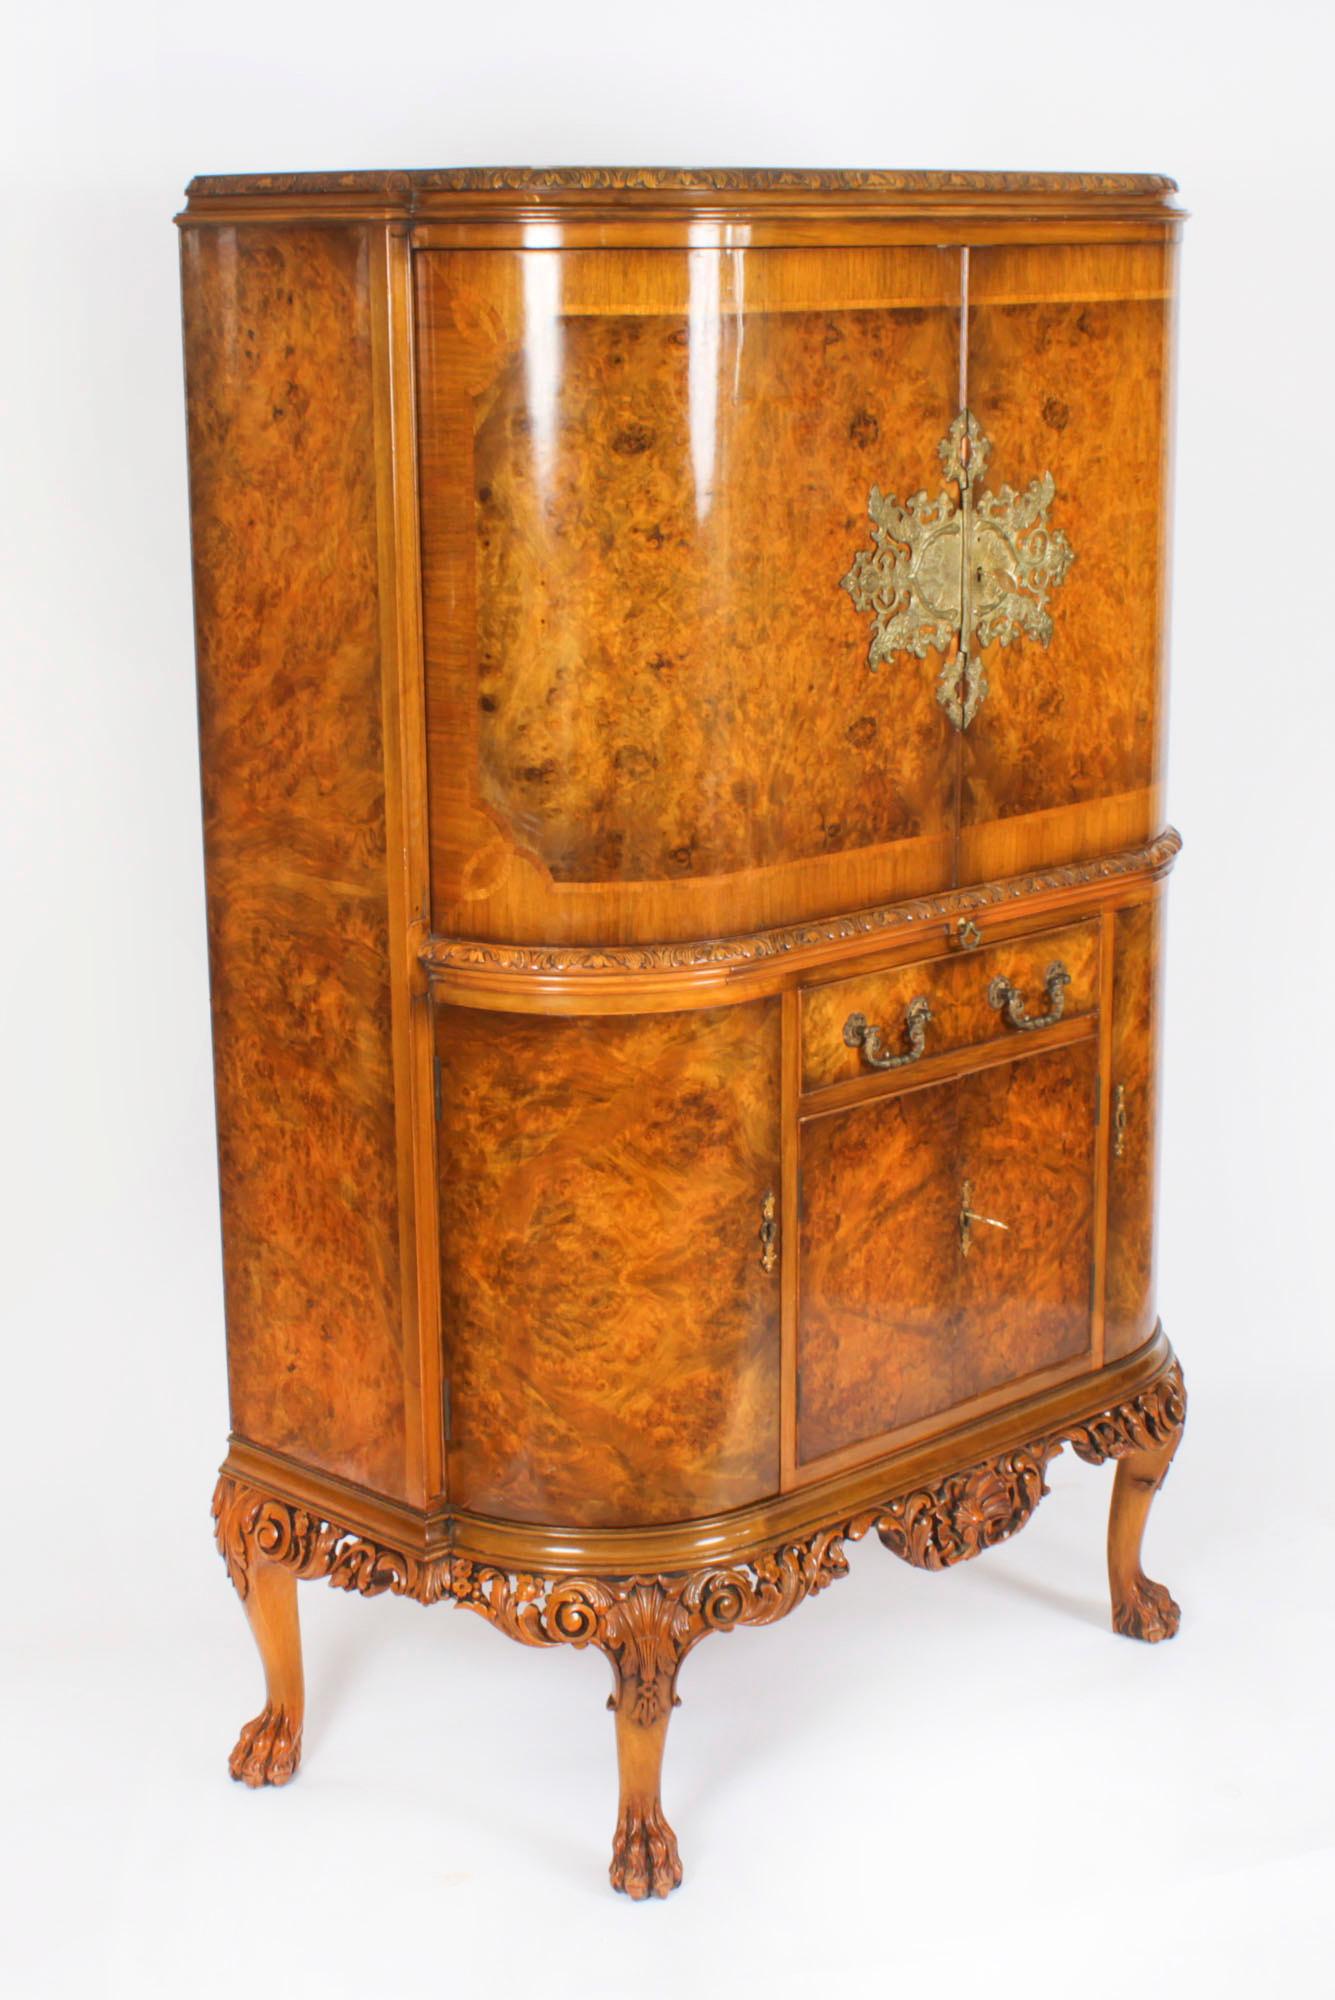 This is a superb quality vintage  burr walnut bow fronted cocktail cabinet with fitted and mirrored maple interior by Berick Furniture, dating from the mid 20th Century.

The upper part comprises a decorative carved cornice above a pair of bow doors